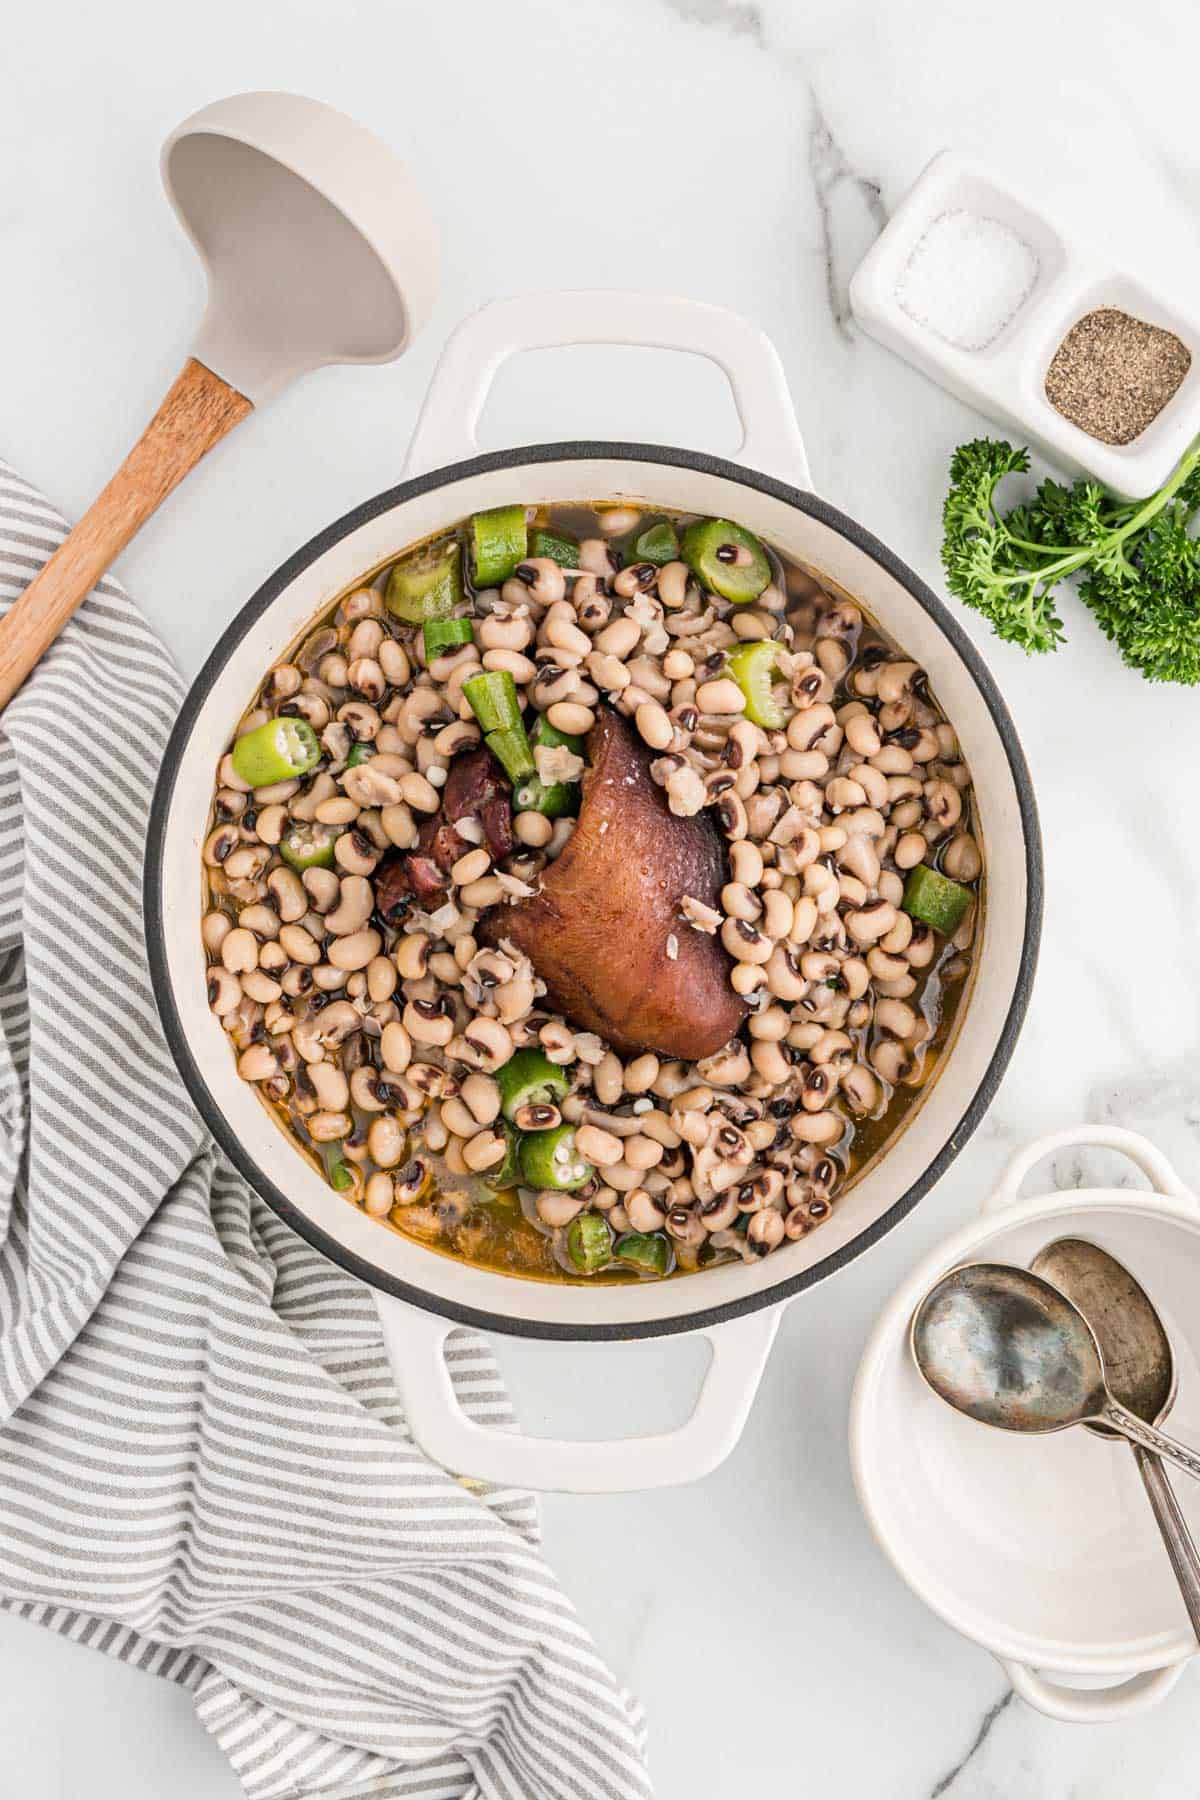 Southern black eyed peas with ham hocks in a pot on the table with a spoon next to it to serve.